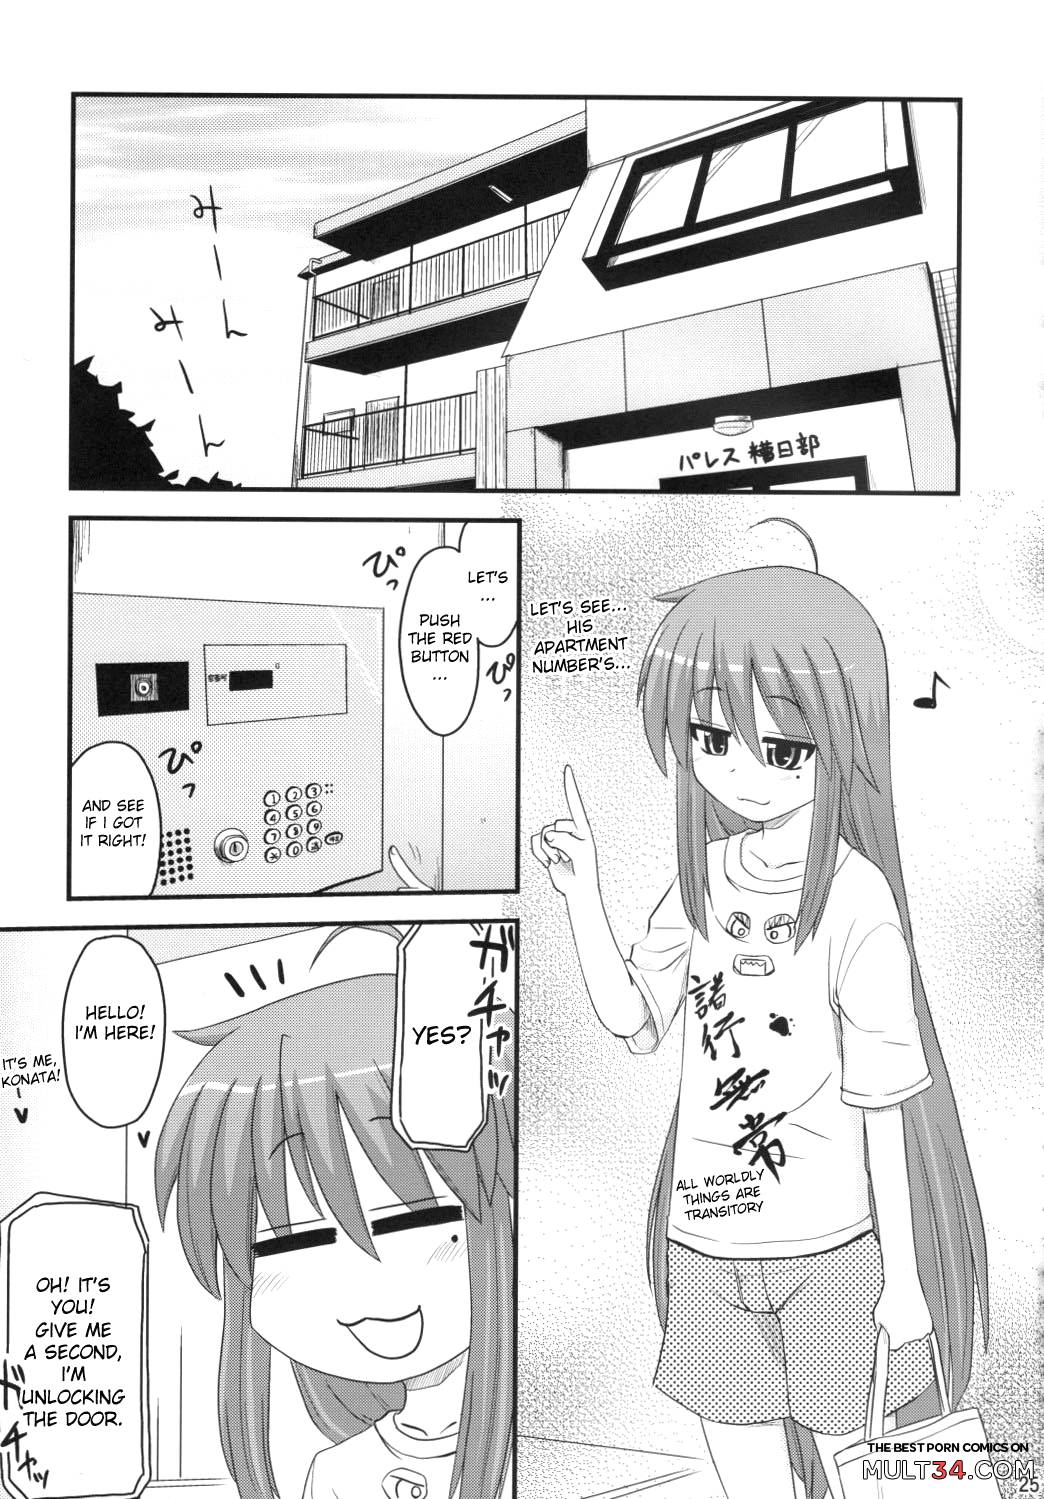 Konata and Oh-zu 4 people each and every one + 1 page 21